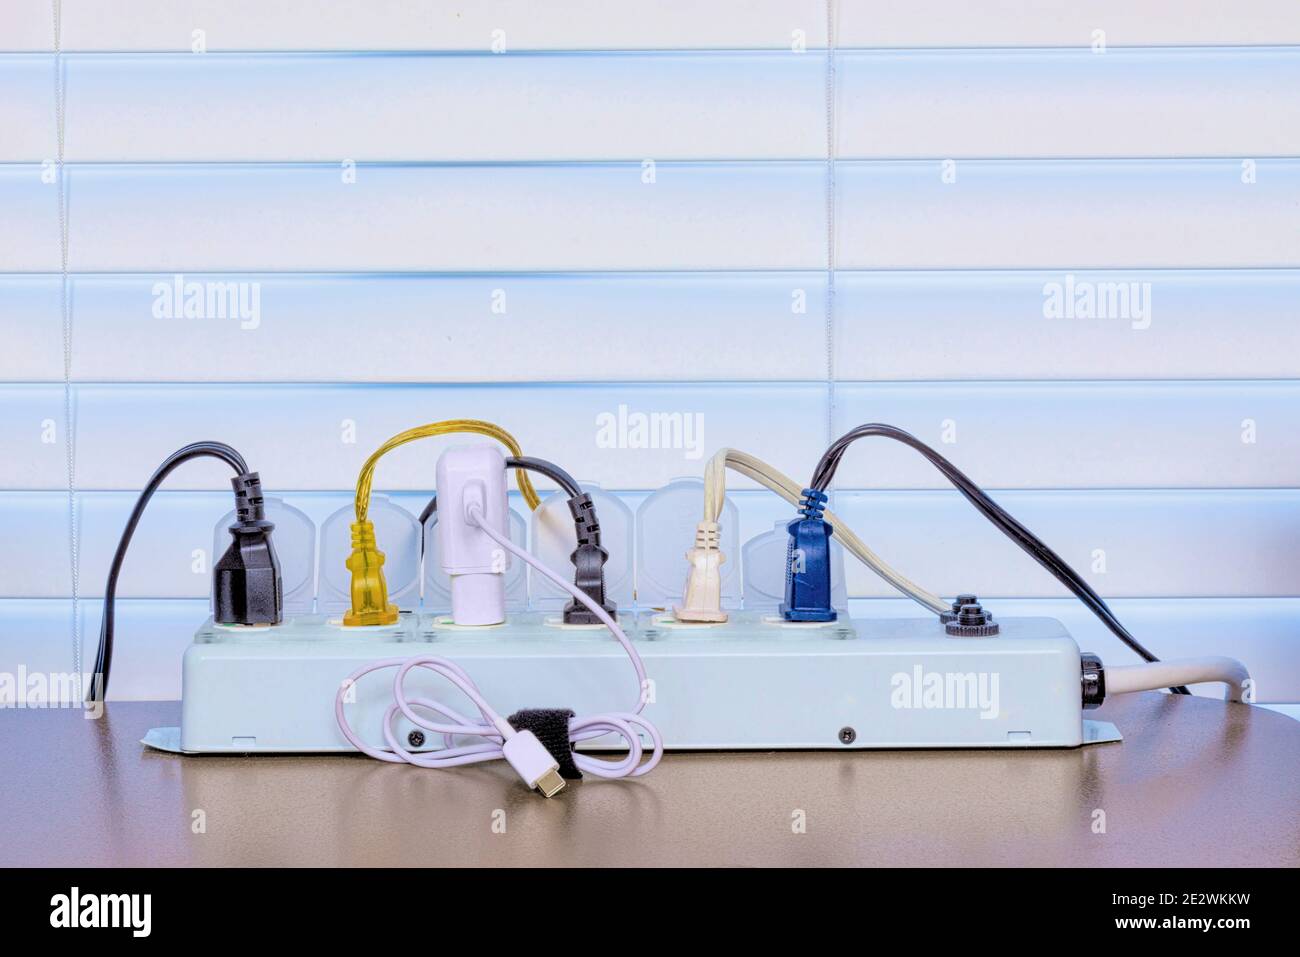 Horizontal shot of a full power strip on a desk in front of a Venetian blind background. Stock Photo